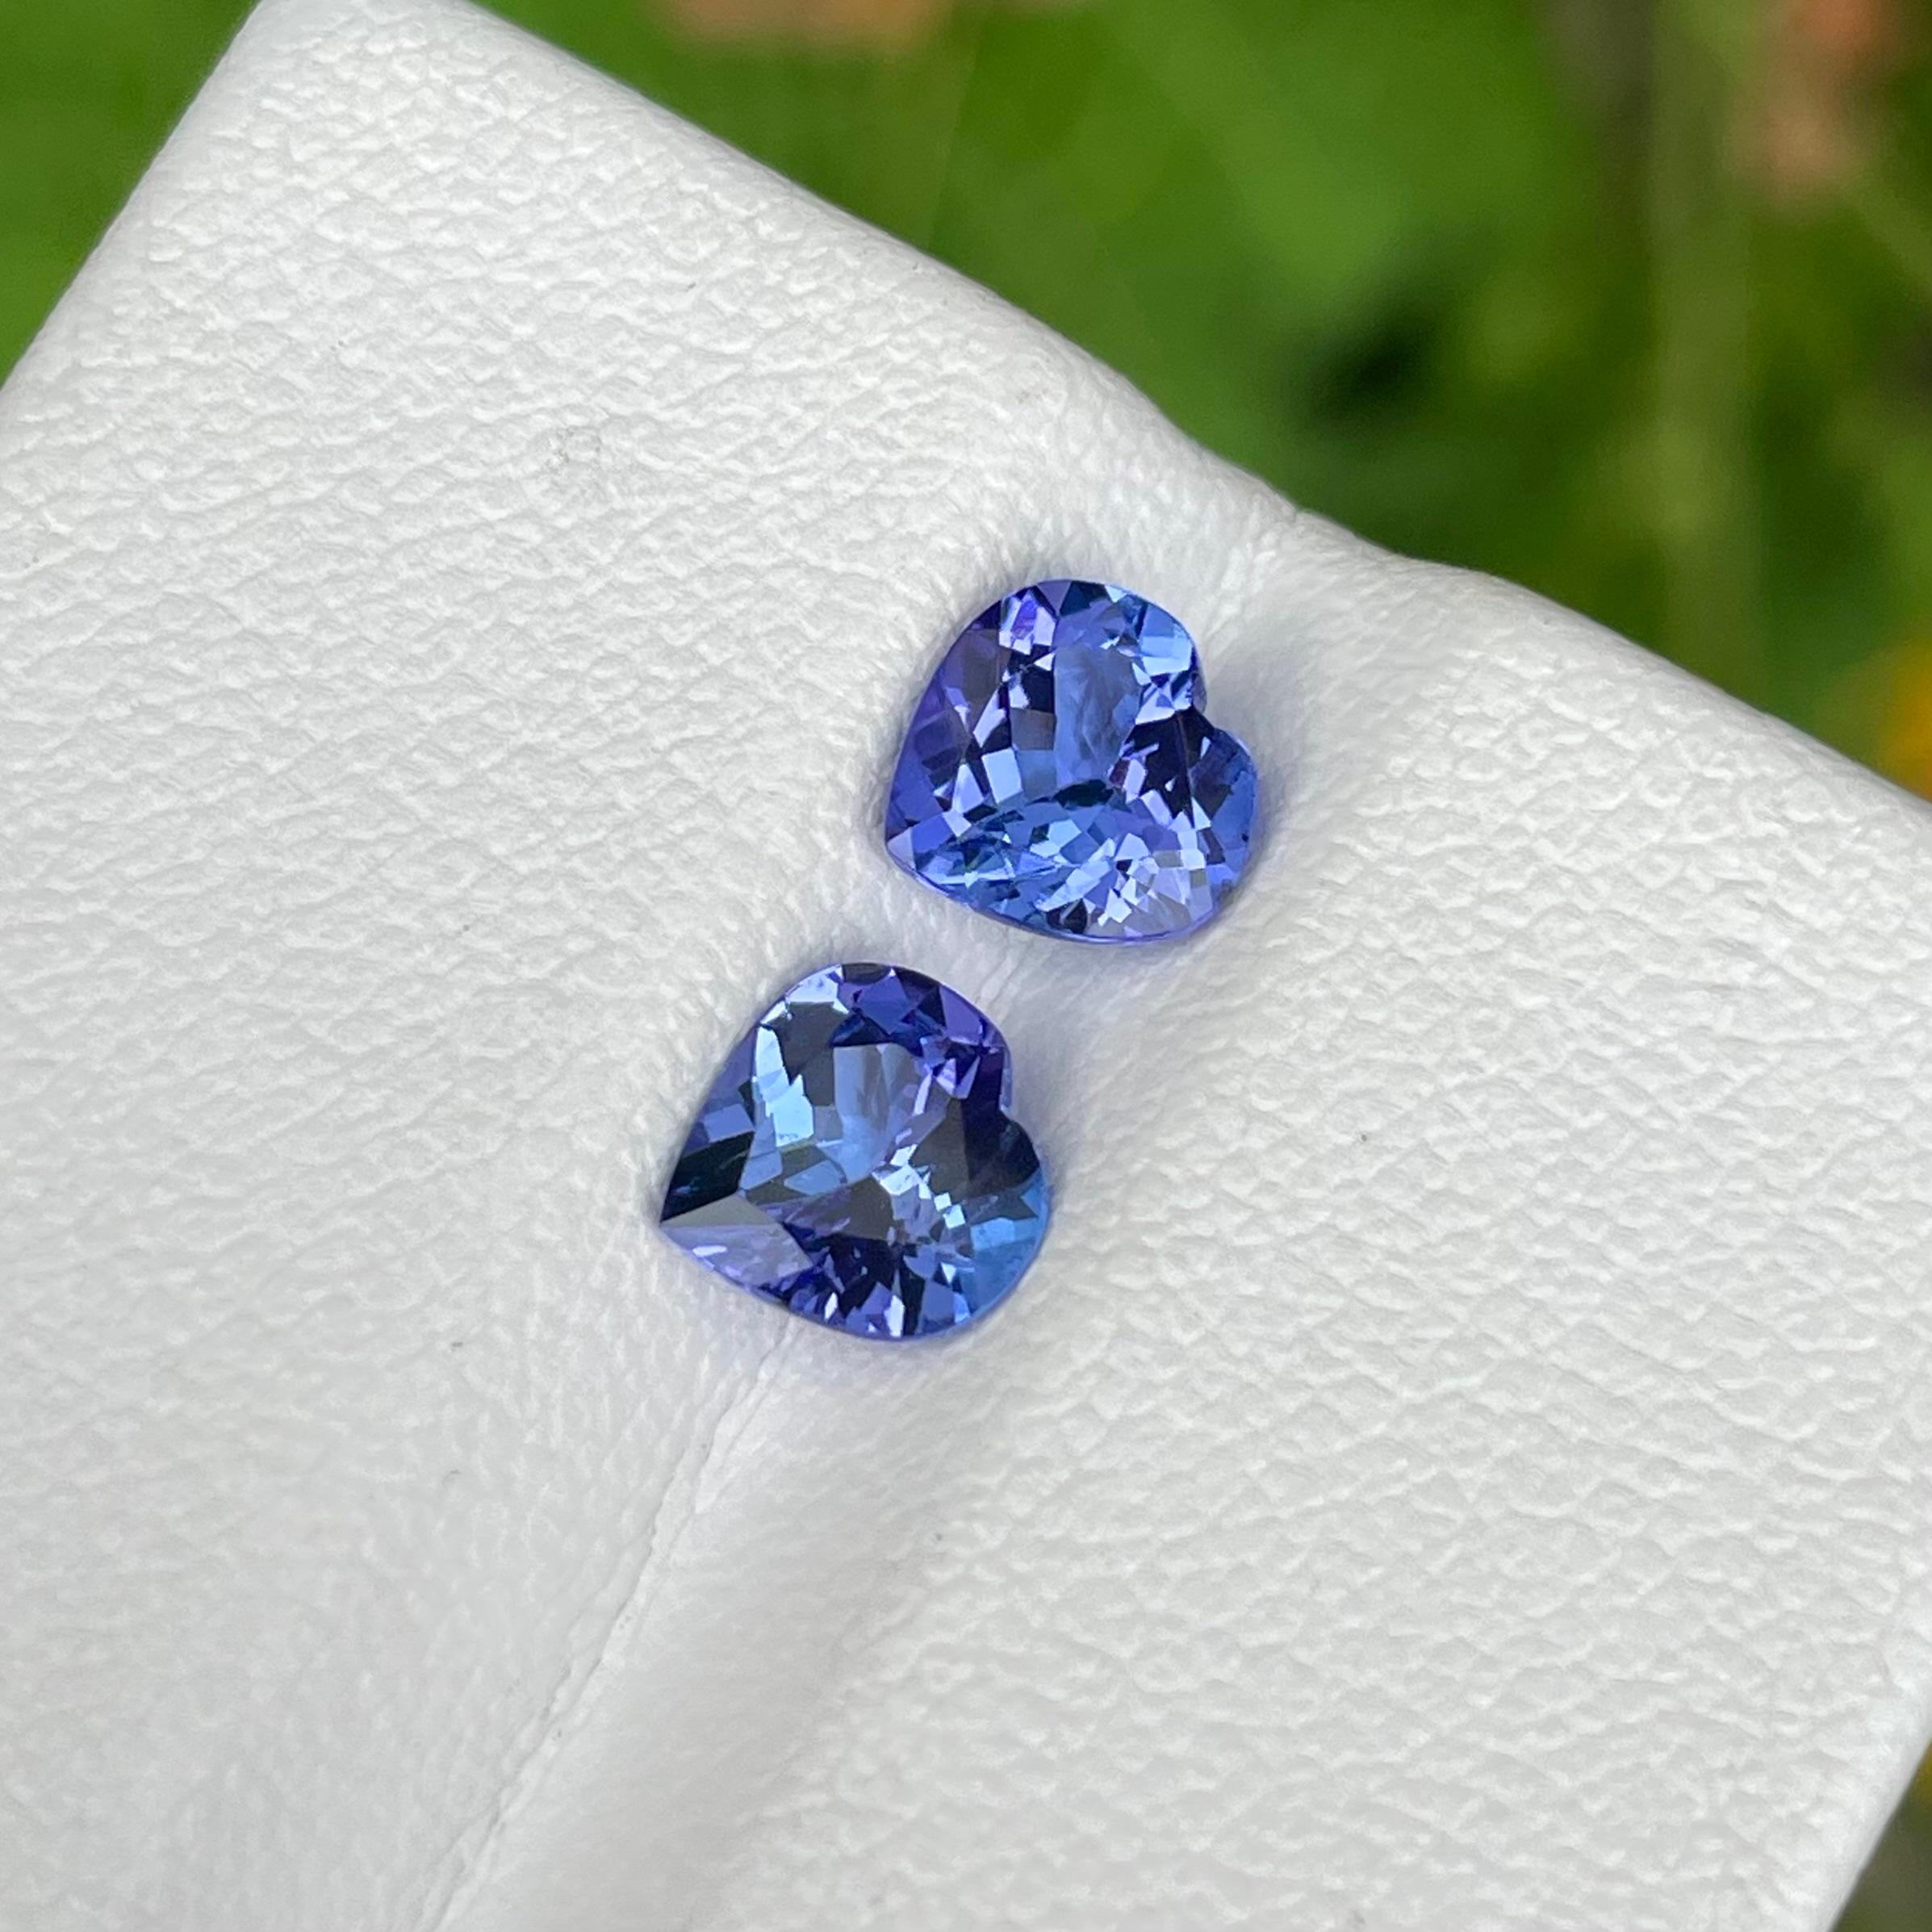 Weight 2.35 carats 
Dimensions 6.6 x 6.8 x 4.5 mm
Treatment Heated 
Origin Tanzania 
Clarity Eye Clean 
Shape Heart 
Cut Heart 



Introducing an exquisite pair of Heart Shaped Blue Tanzanite Stones, each weighing 2.35 carats, and sourced directly